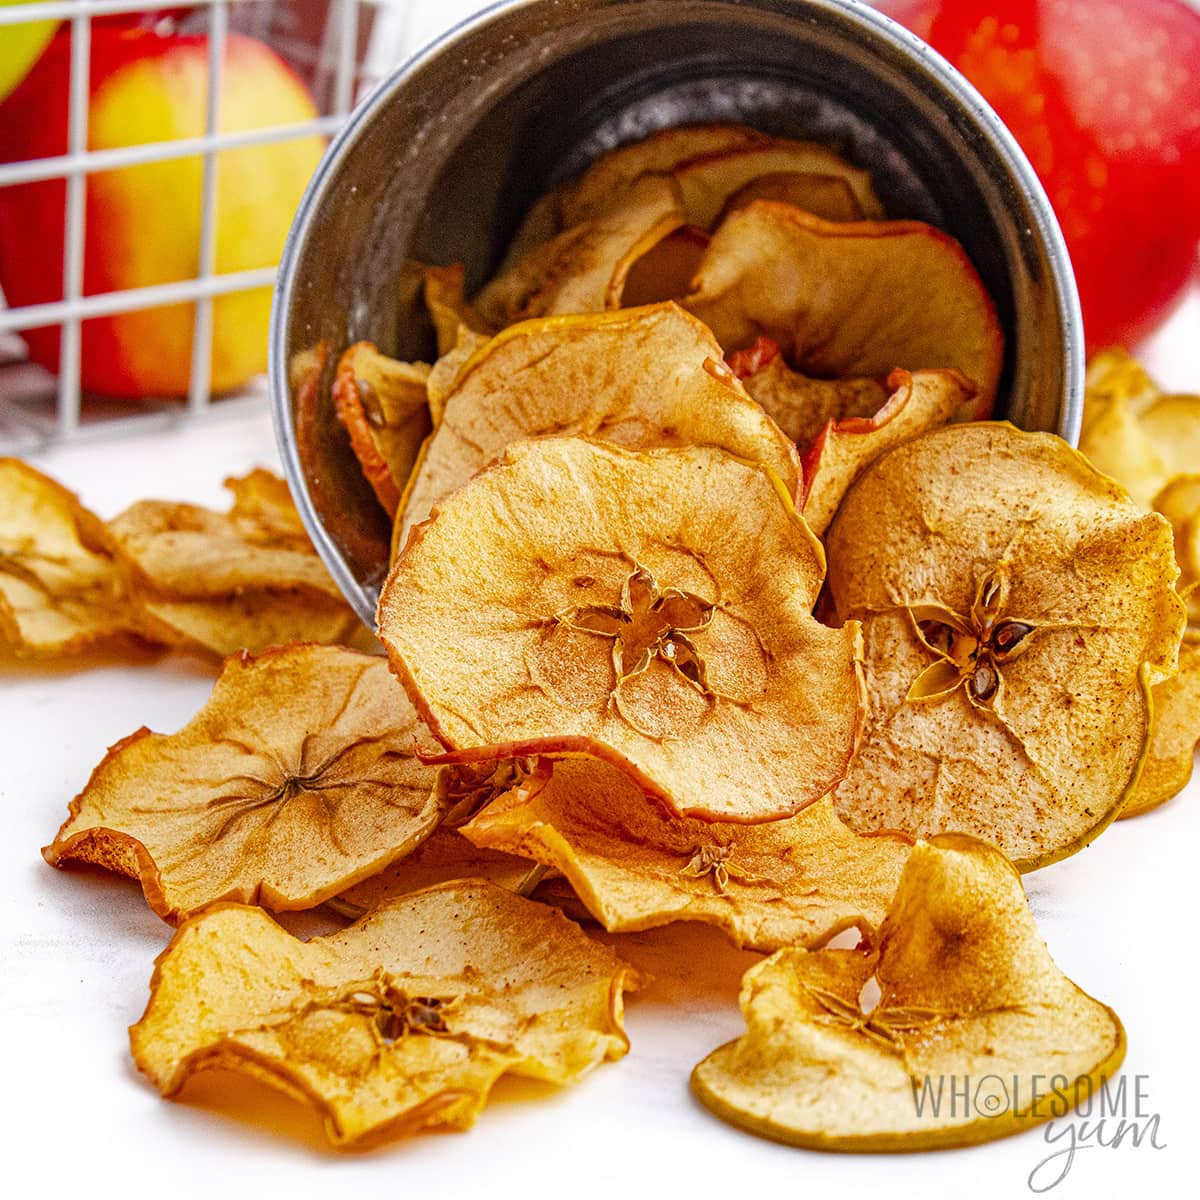 Apple chips spilled out of container.